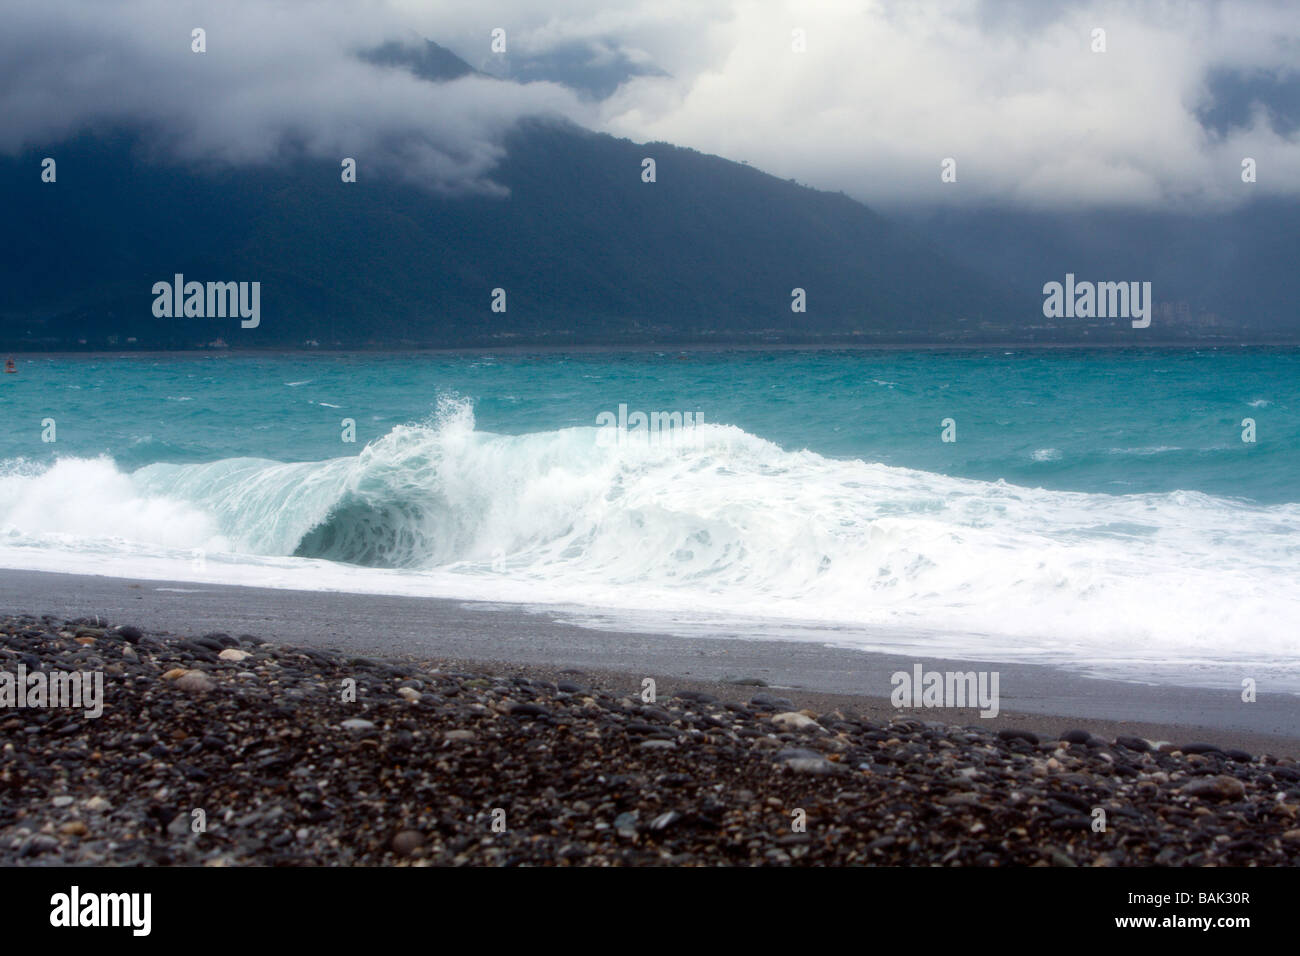 Central Mountain Range behind plunging or dumping wave, view from pebble beach during rainy day along Chisingtan Scenic Area, Hualien, Taiwan Stock Photo